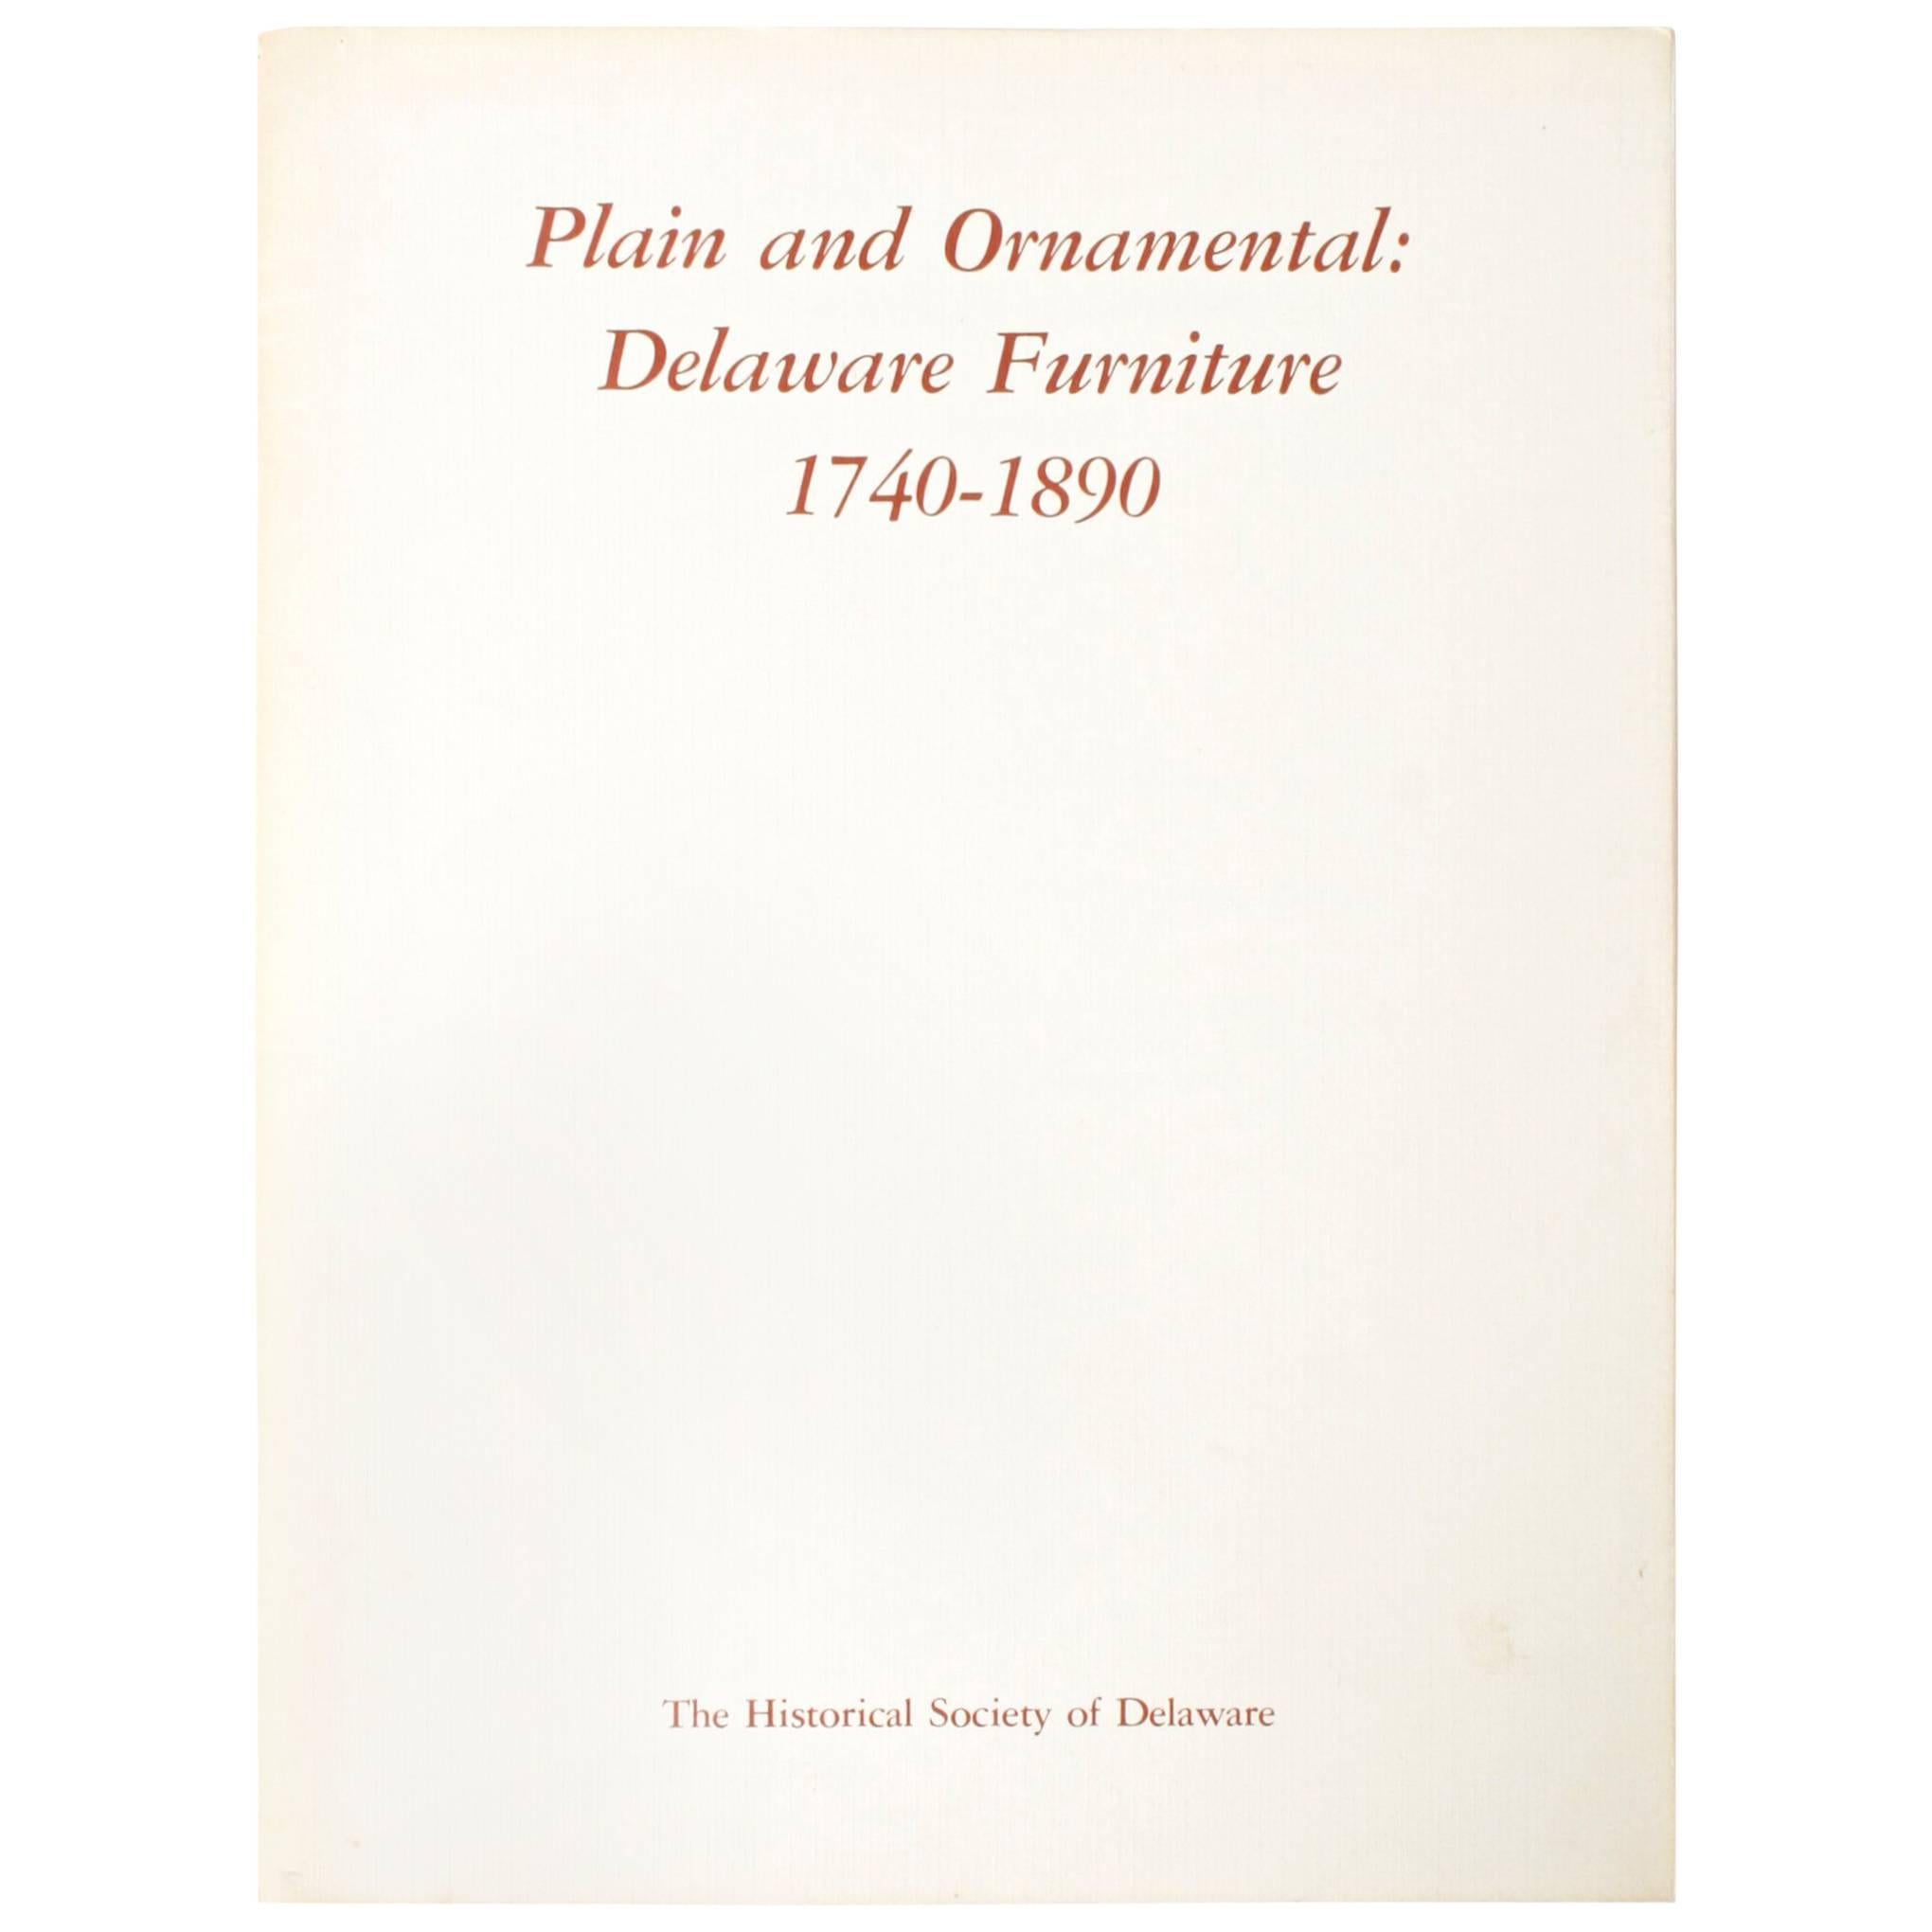 Plain and Ornamental, Delaware Furniture 1740-1890, First Edition